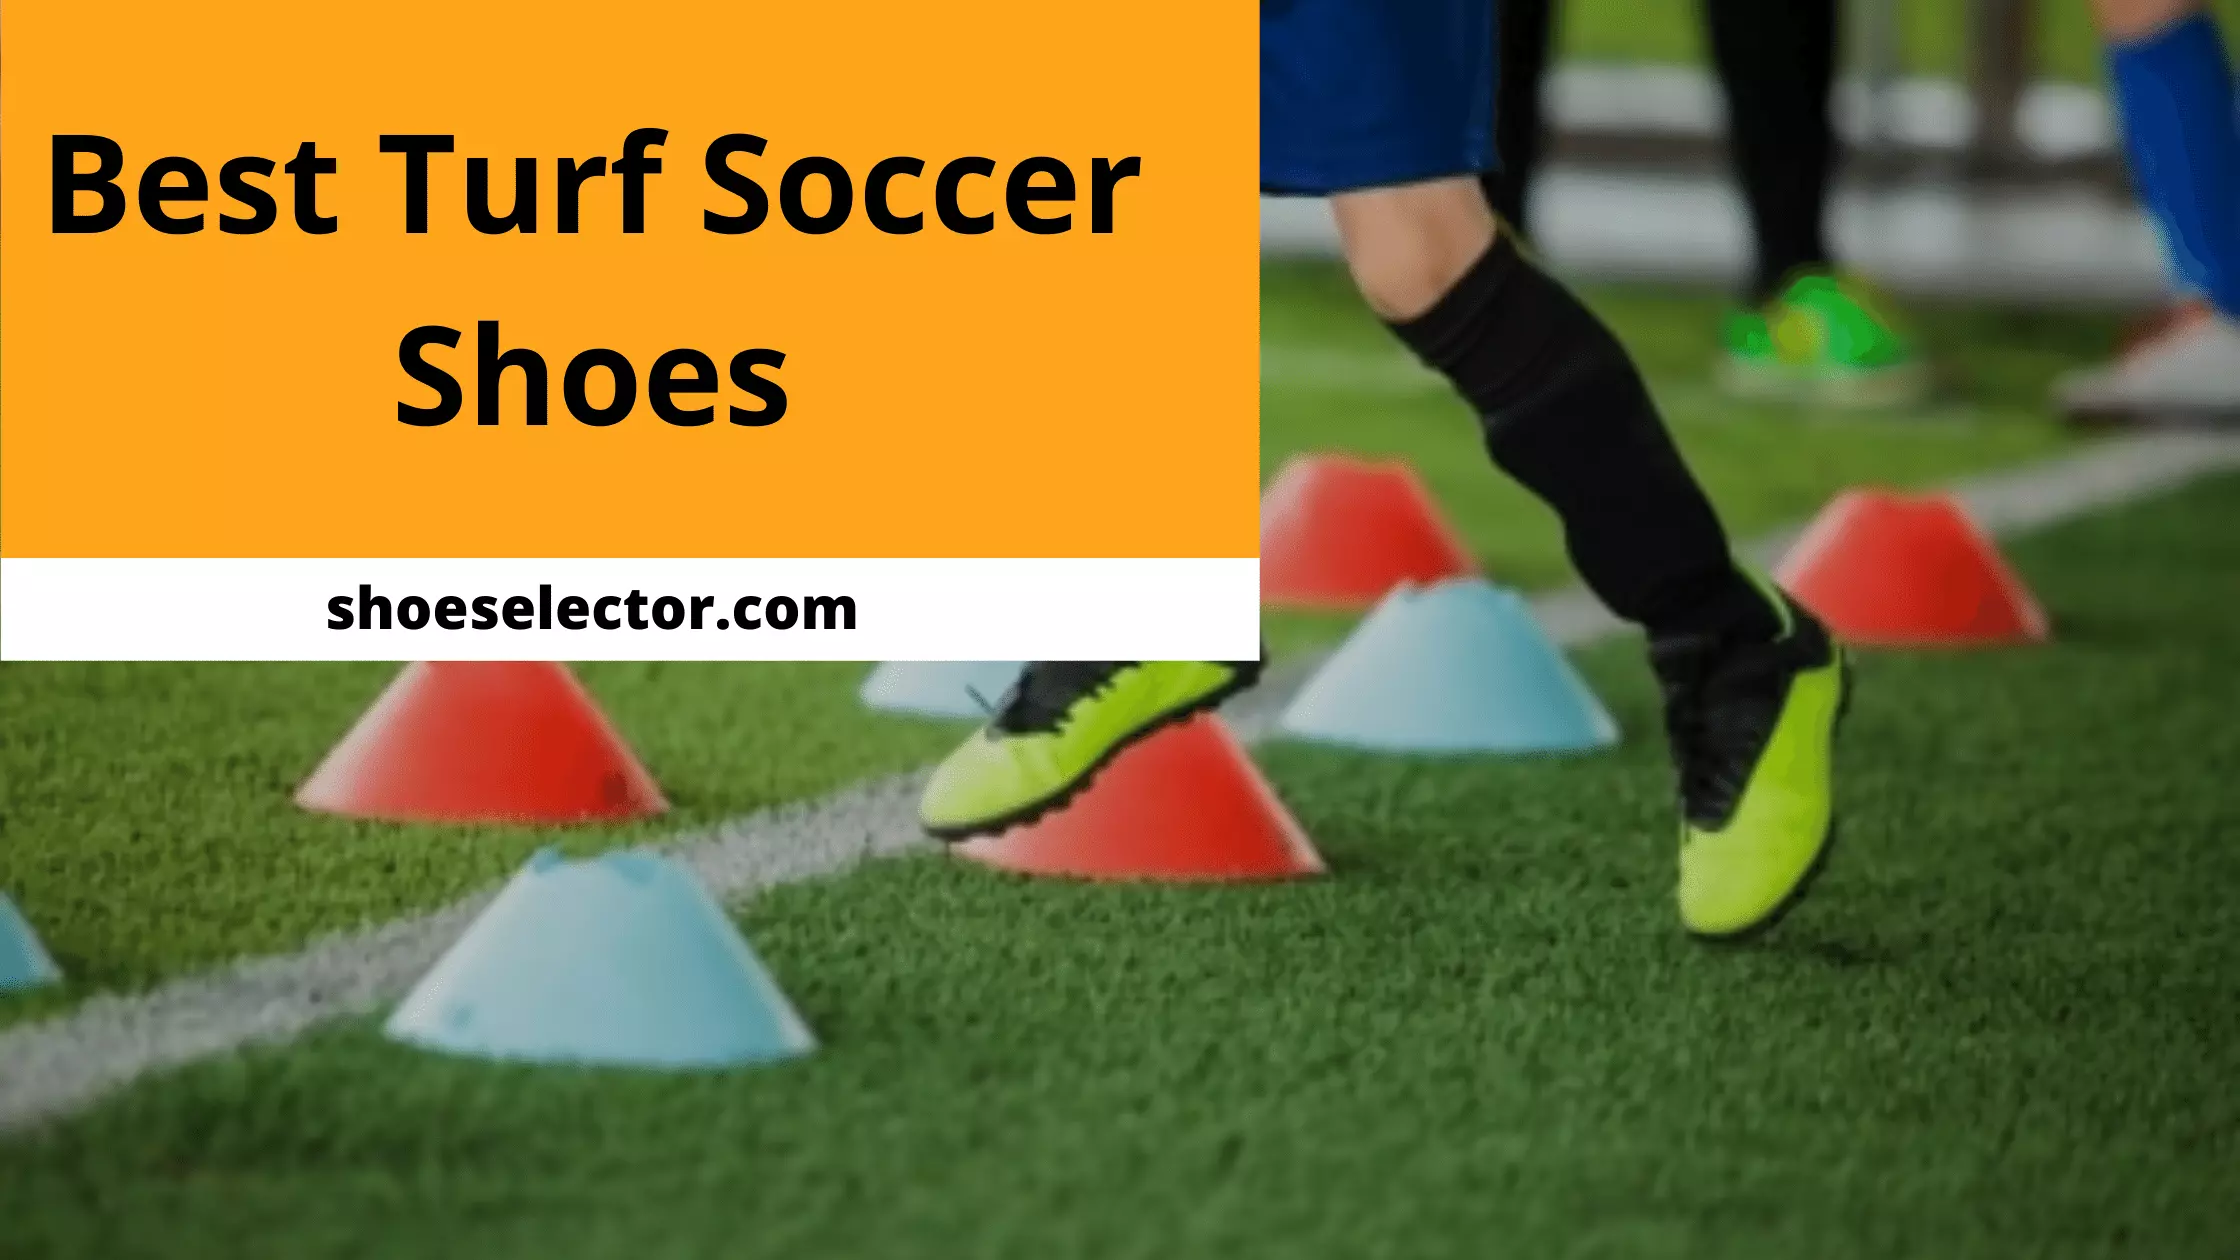 Best Turf Soccer Shoes - Tested & Reviewed By Experts